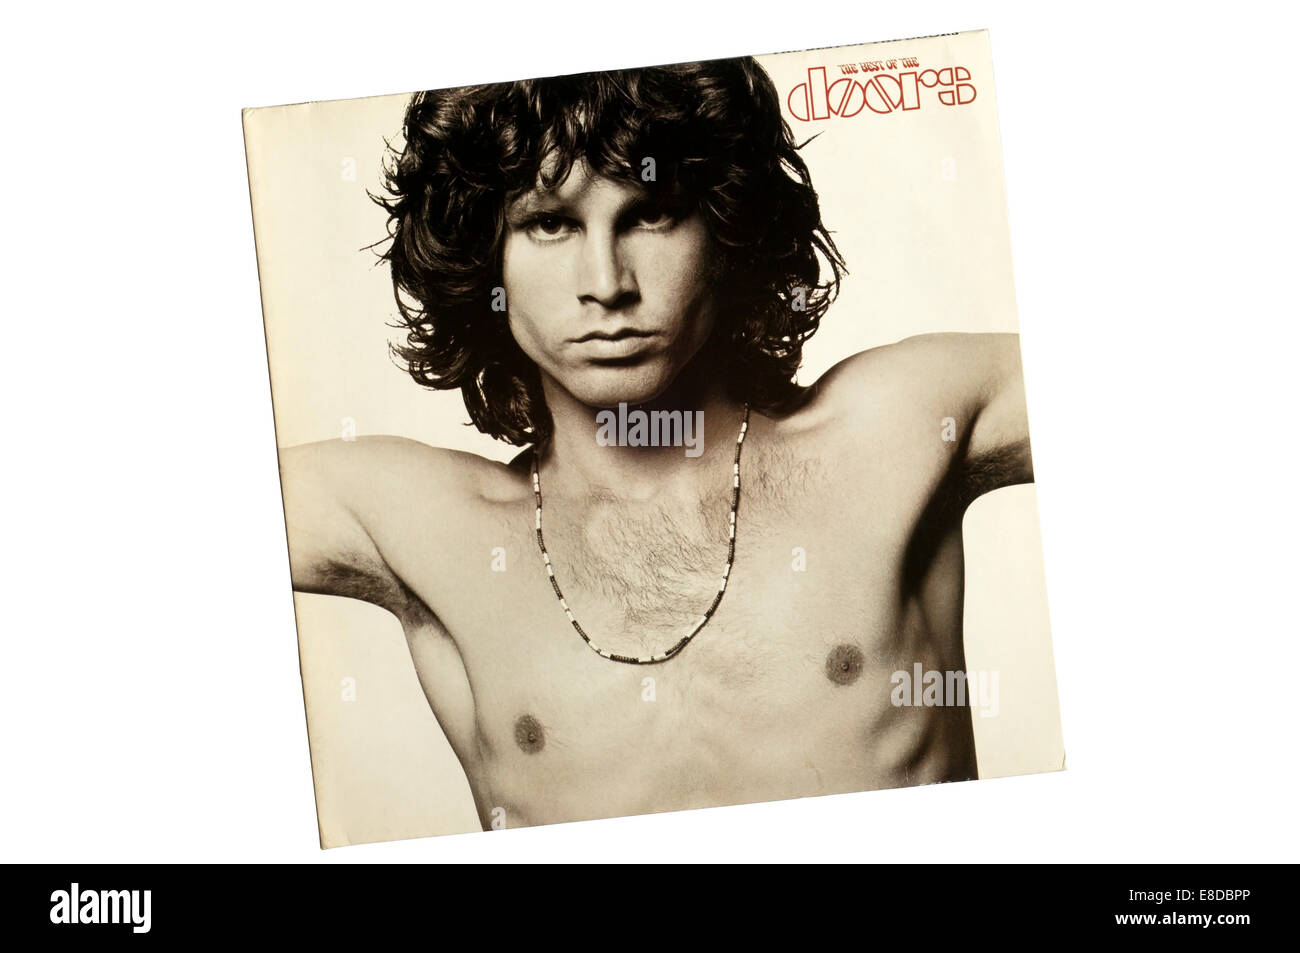 The Best of The Doors was a two-disc compilation album released in 1985. Stock Photo